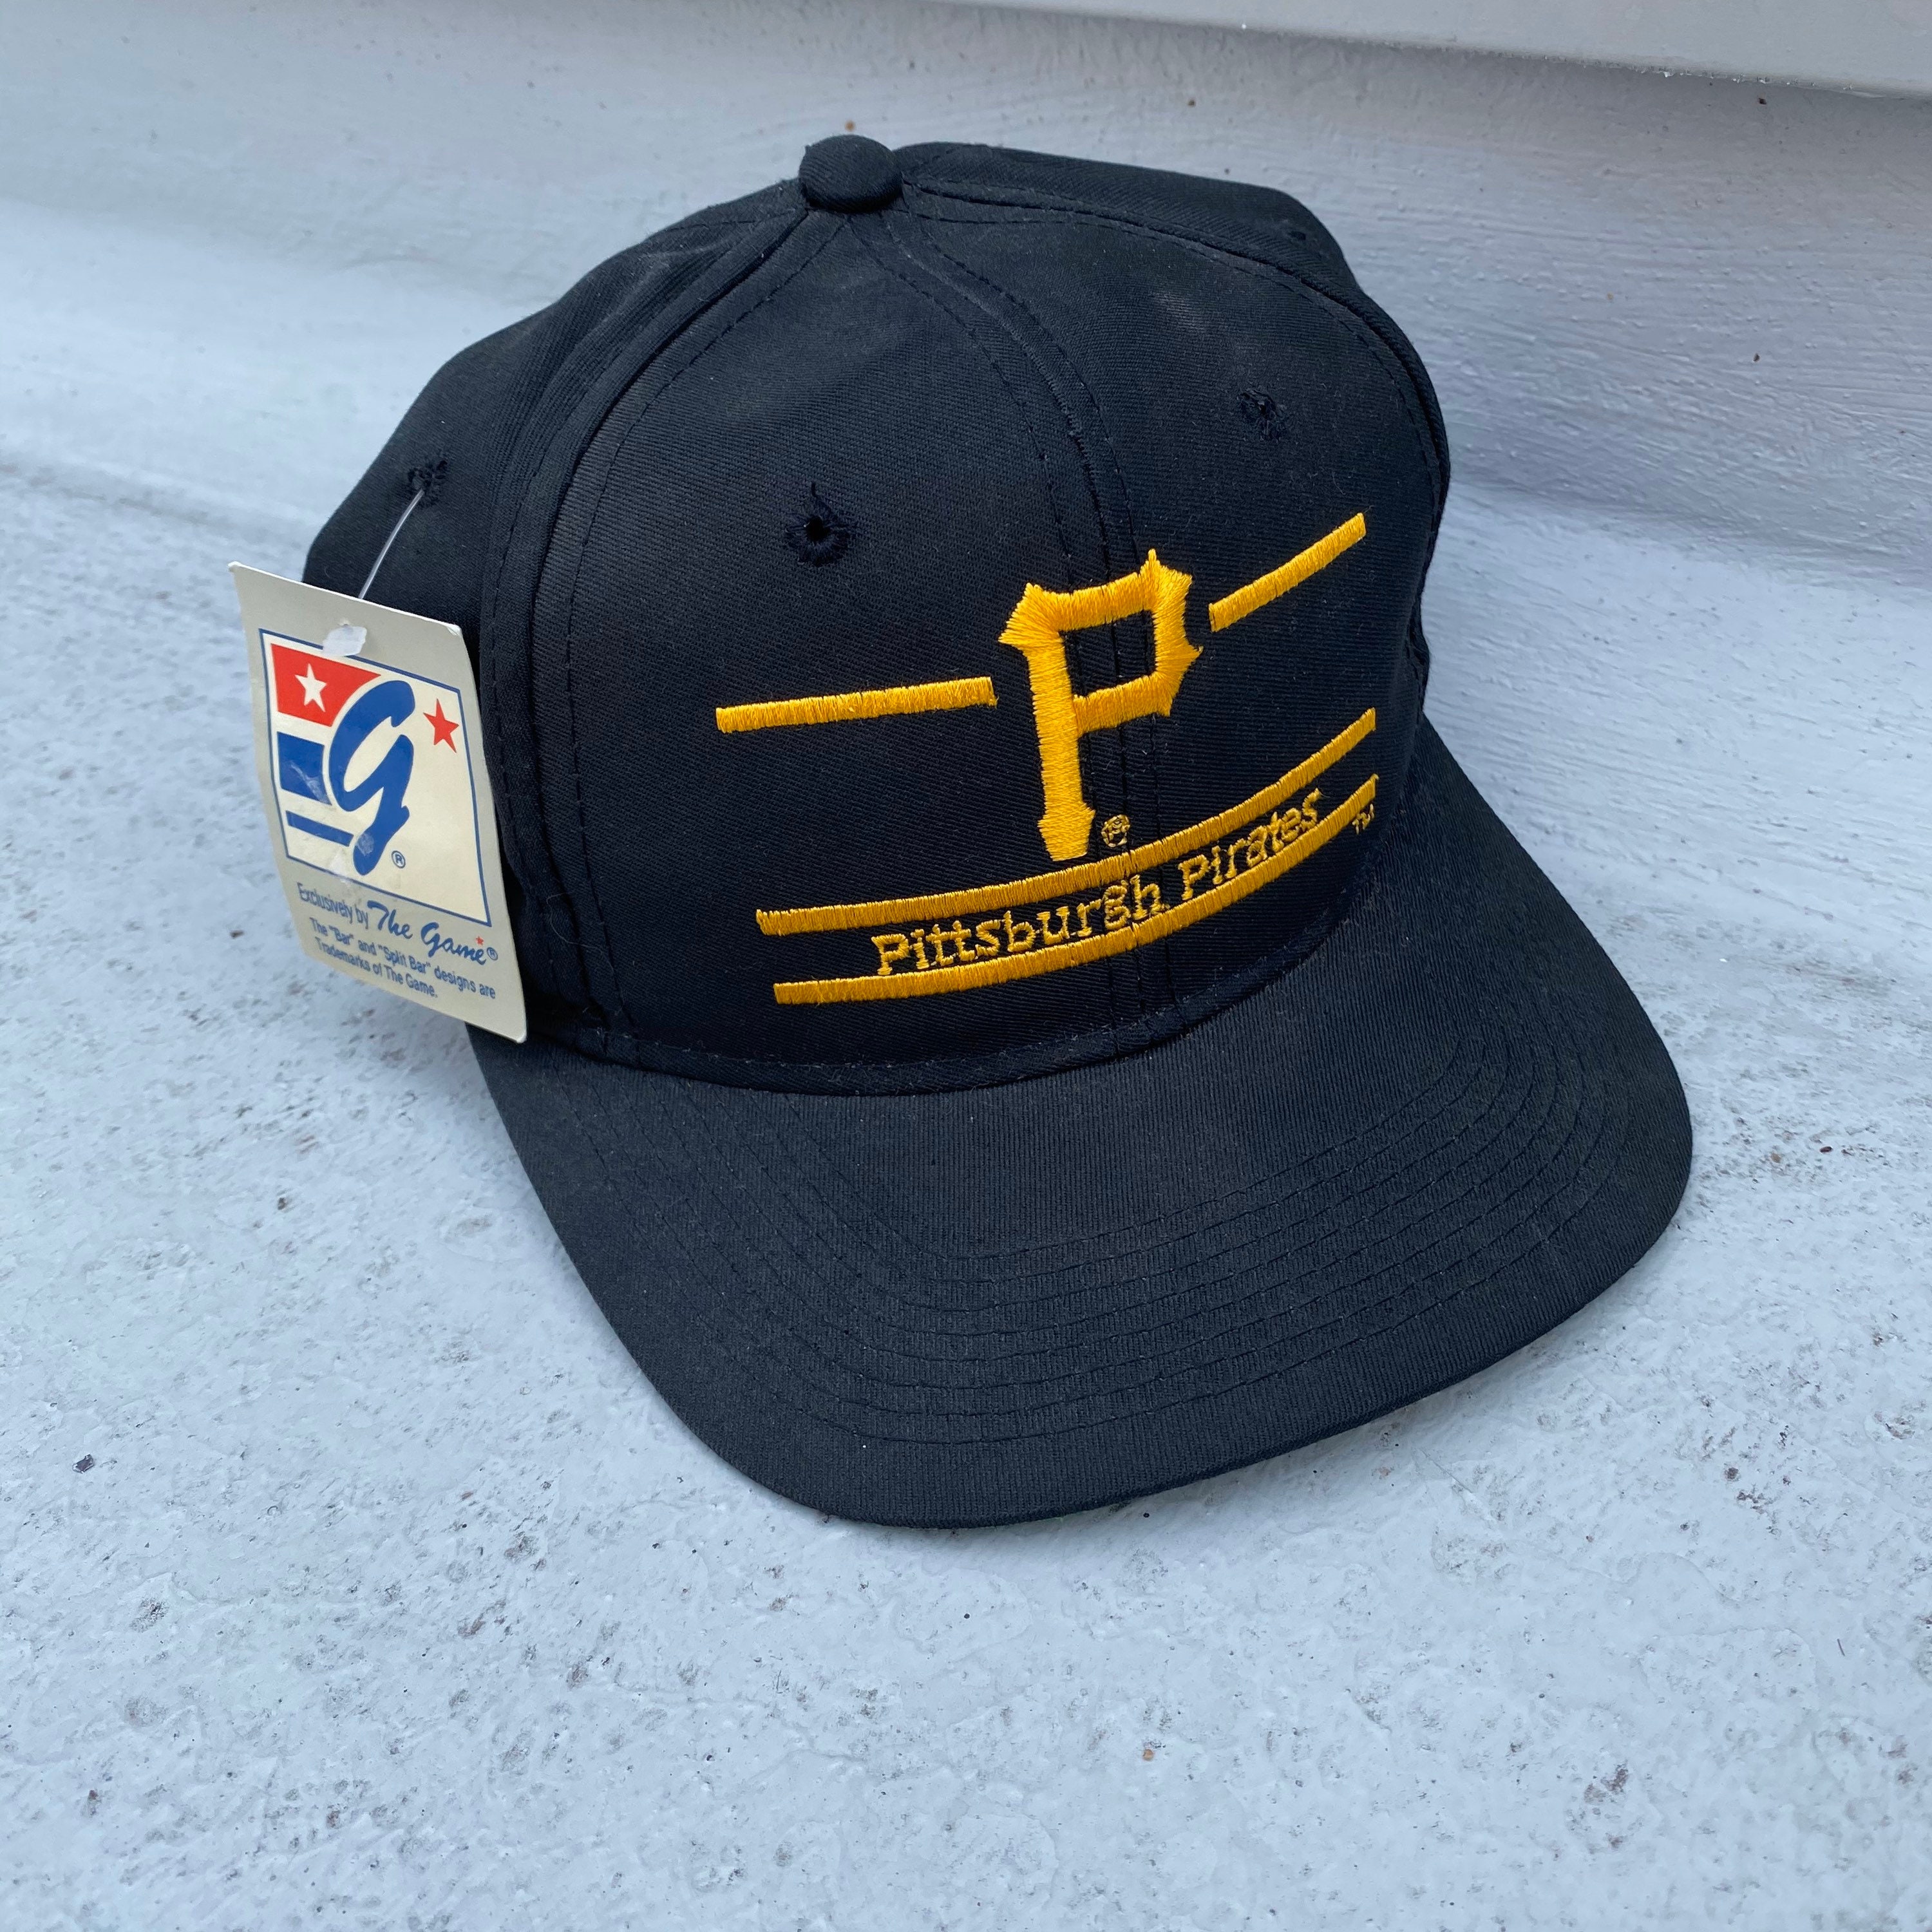 Vintage Pittsburgh Pirates Split Bar Snapback Hat Adjustable Baseball By  The Game Youngan New with Tag Deadstock